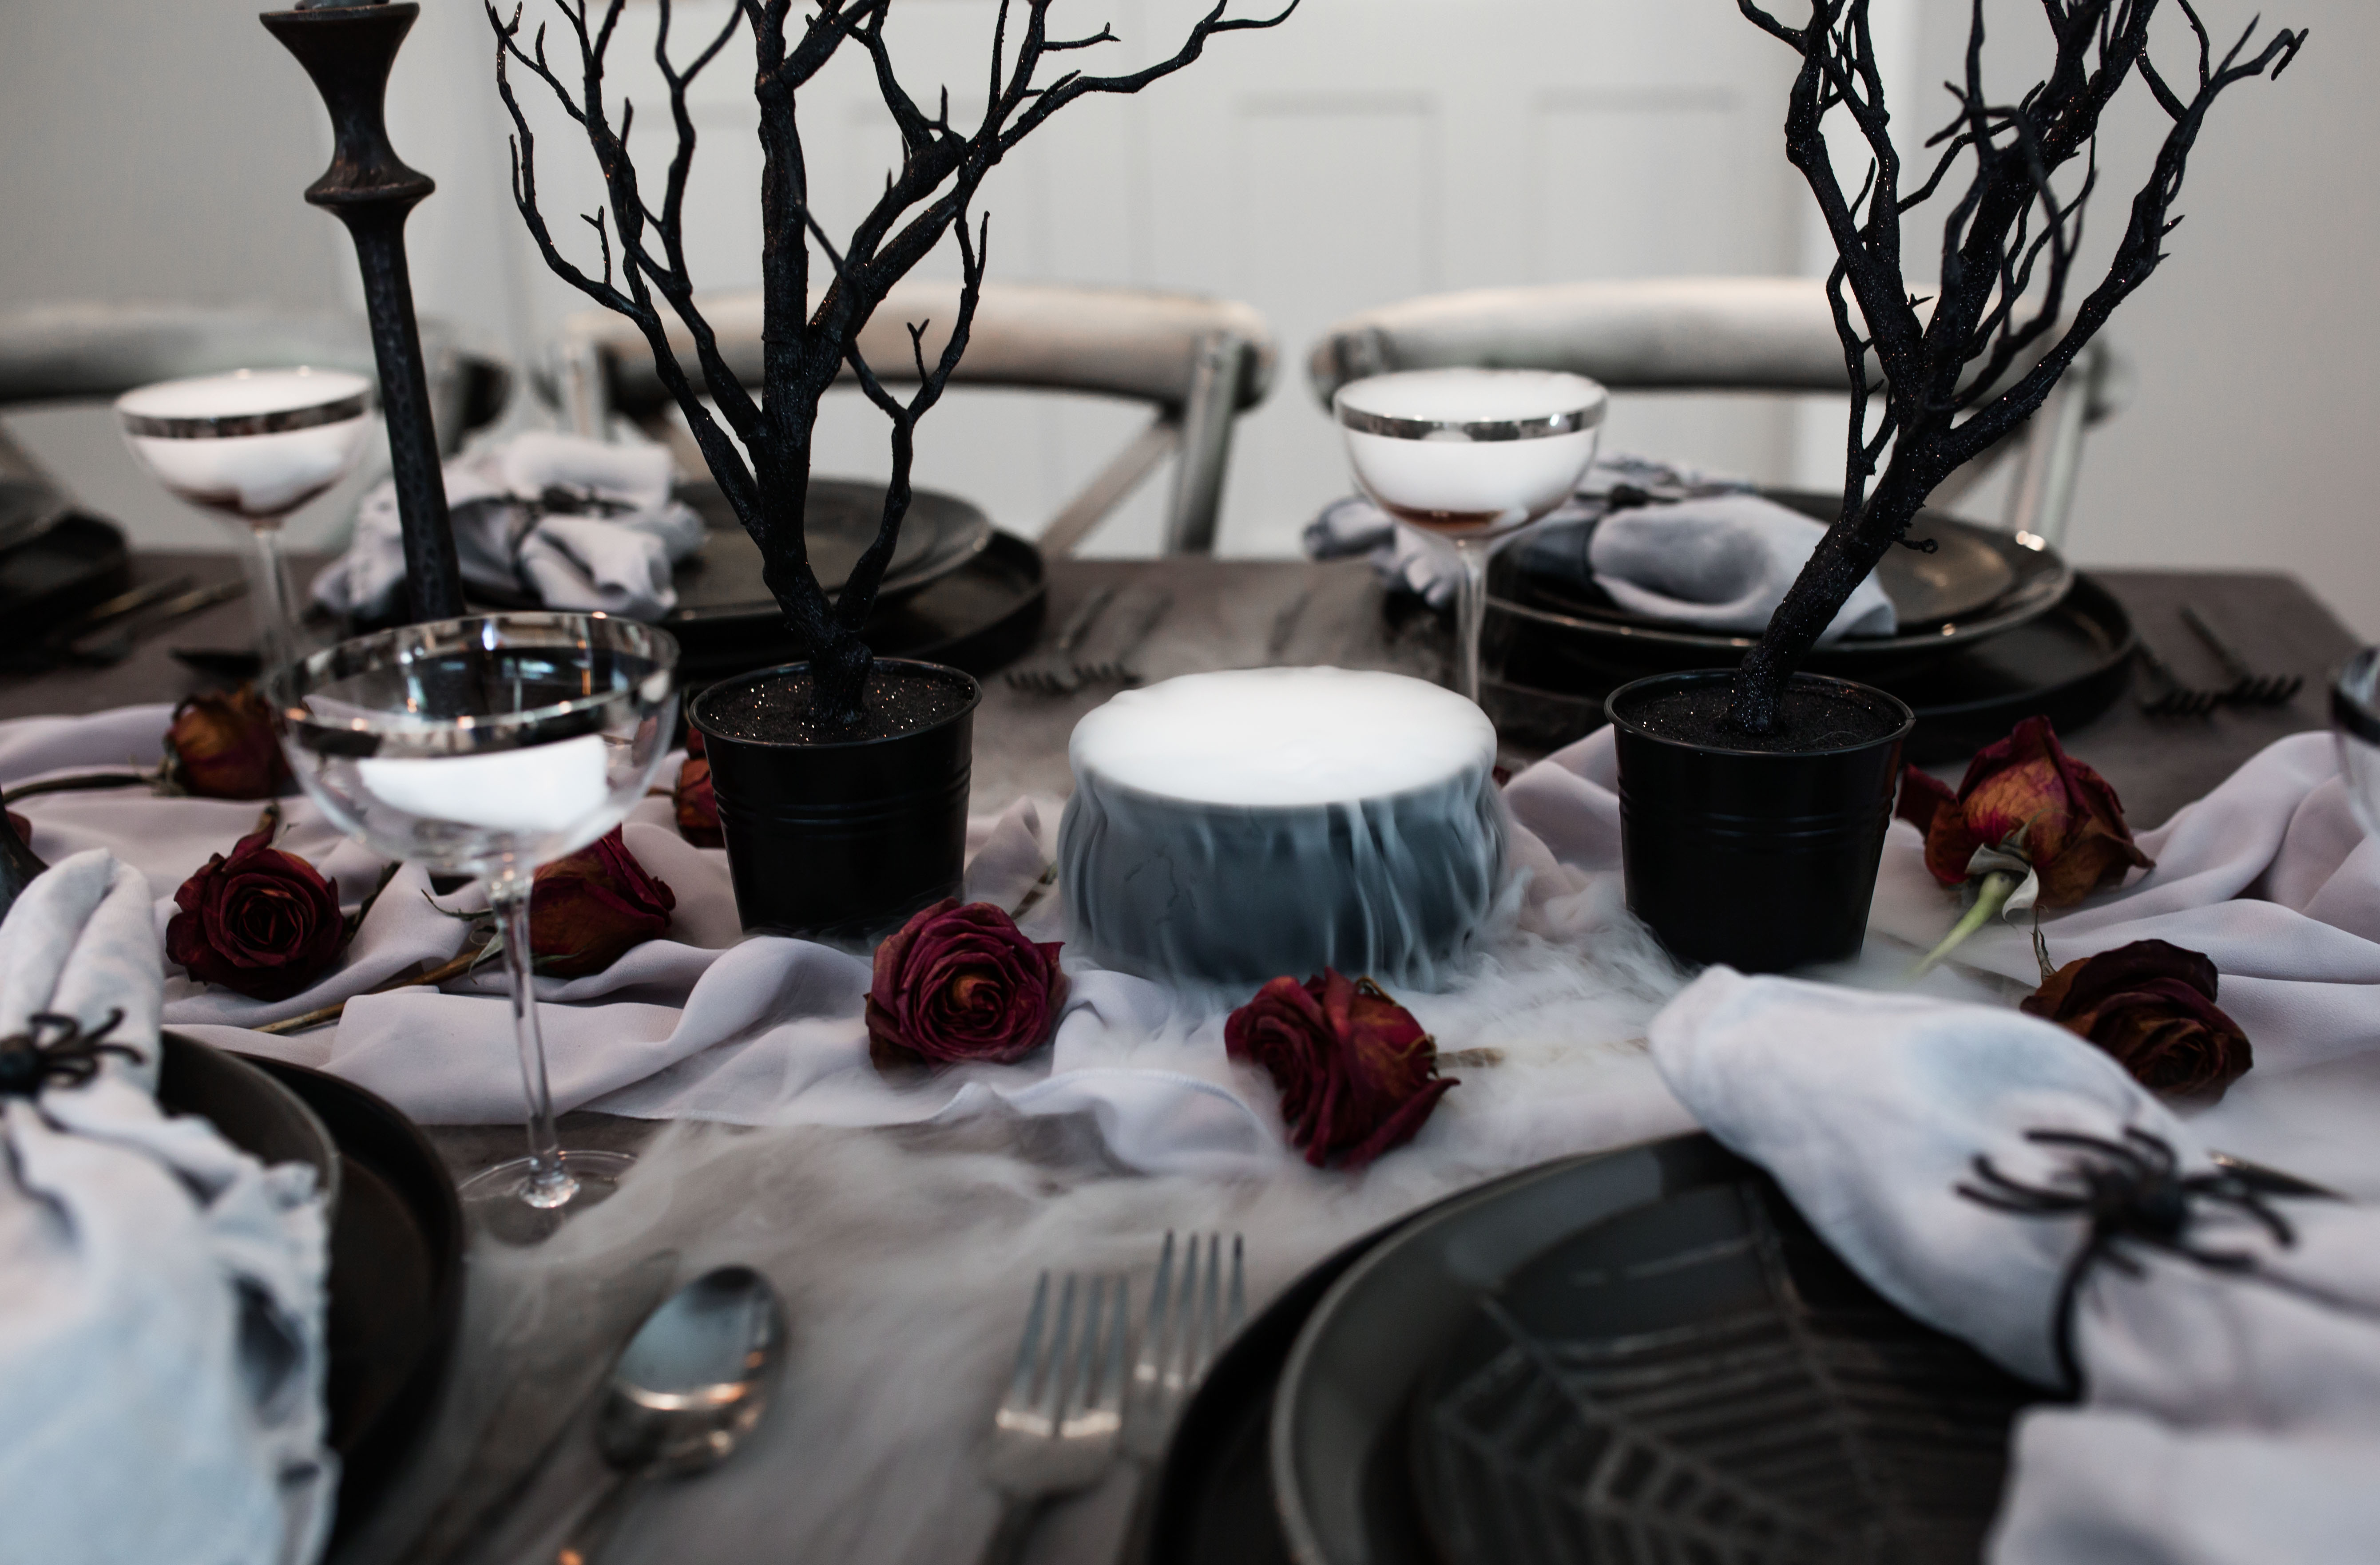 A Magical, Mystical Halloween Table from the Graveyard